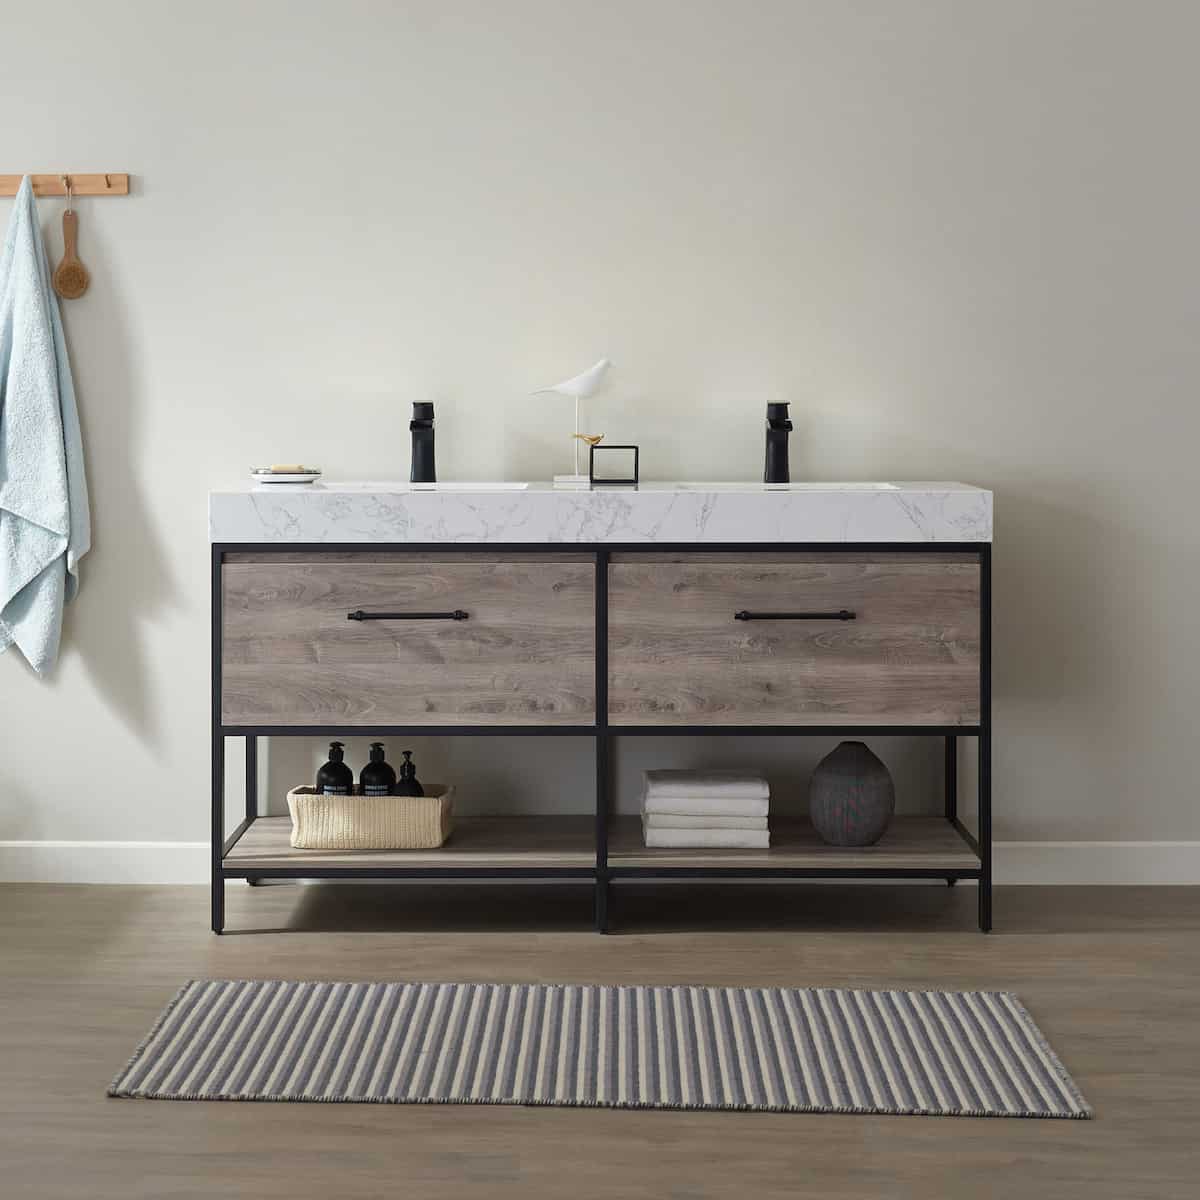 Vinnova Palma 60 Inch Freestanding Double Vanity in Mexican Oak with White Composite Grain Stone Countertop Without Mirrors in Bathroom 701260-MXO-GW-NM